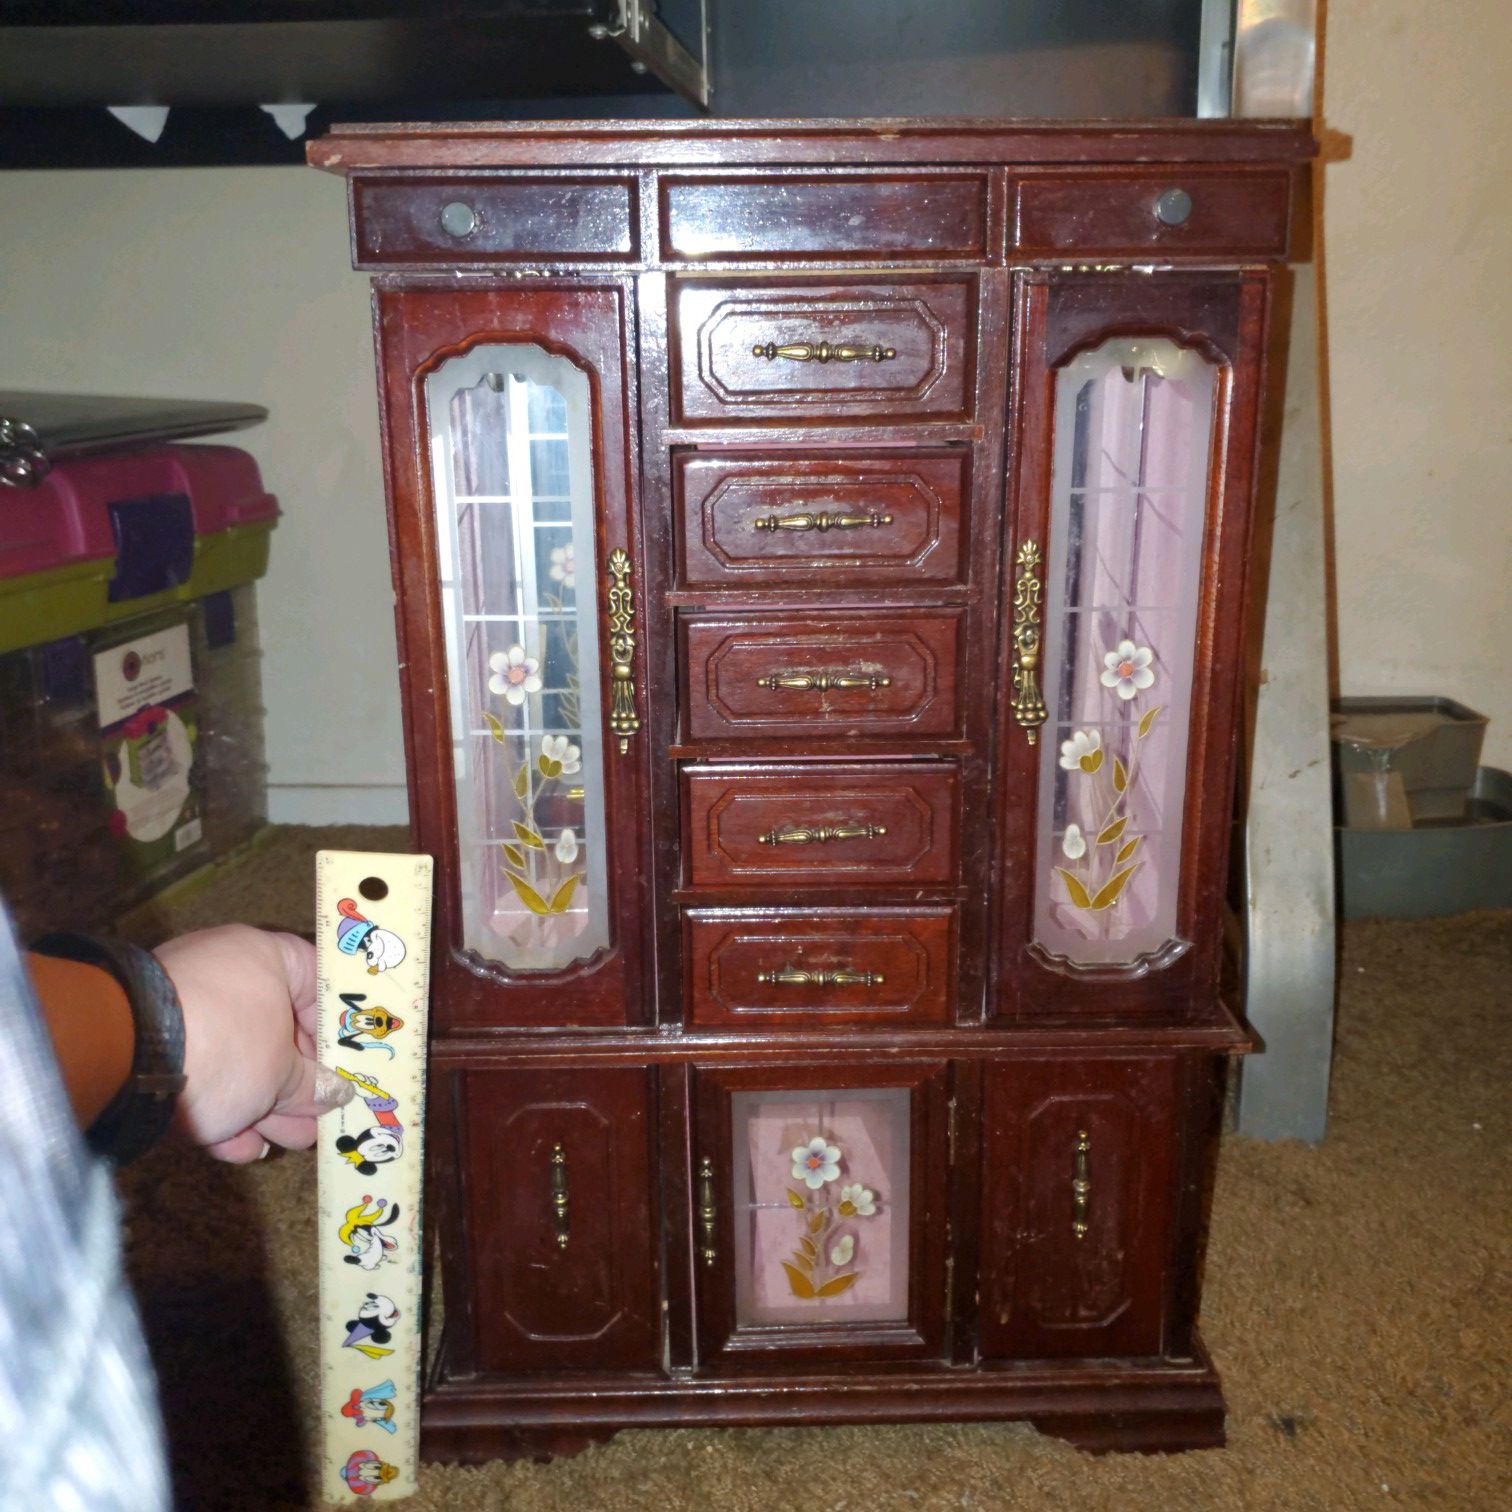 Vintage Cherry Wood Jewelry Cabinet/Wooden Jewelry Display/Antique Jewelry Armour with Painted Flower Windows 21" x 13"